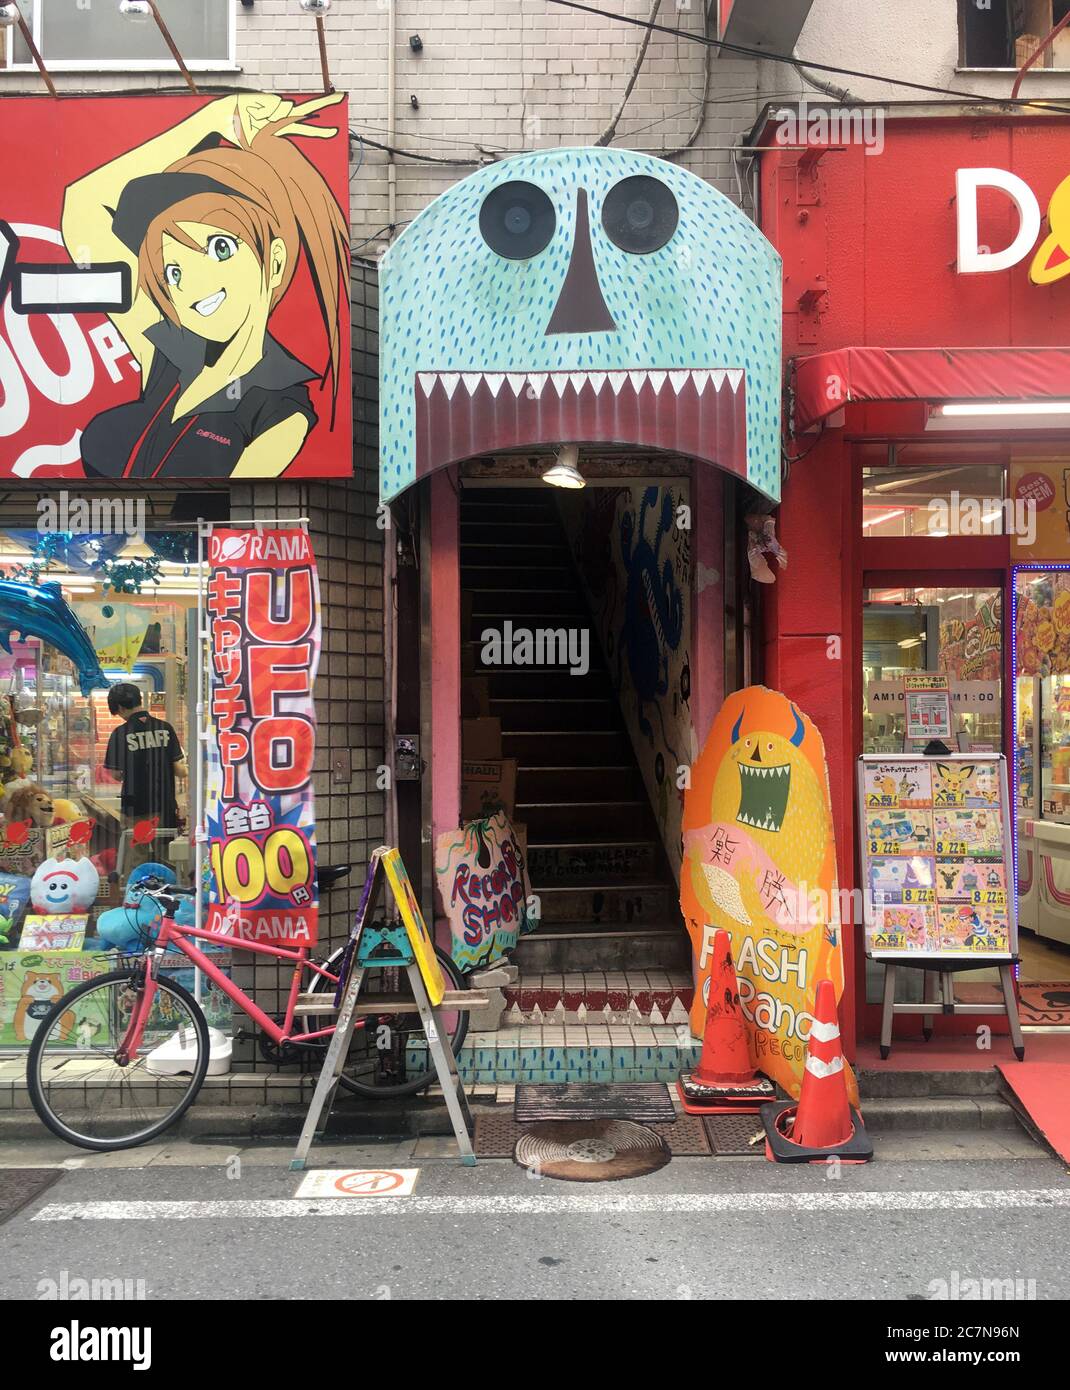 Colorful and creative storefront of Flash Disc Ranch,  a vinyl and CD record store located in the commercial and entertainment district Shimokitazawa. Stock Photo